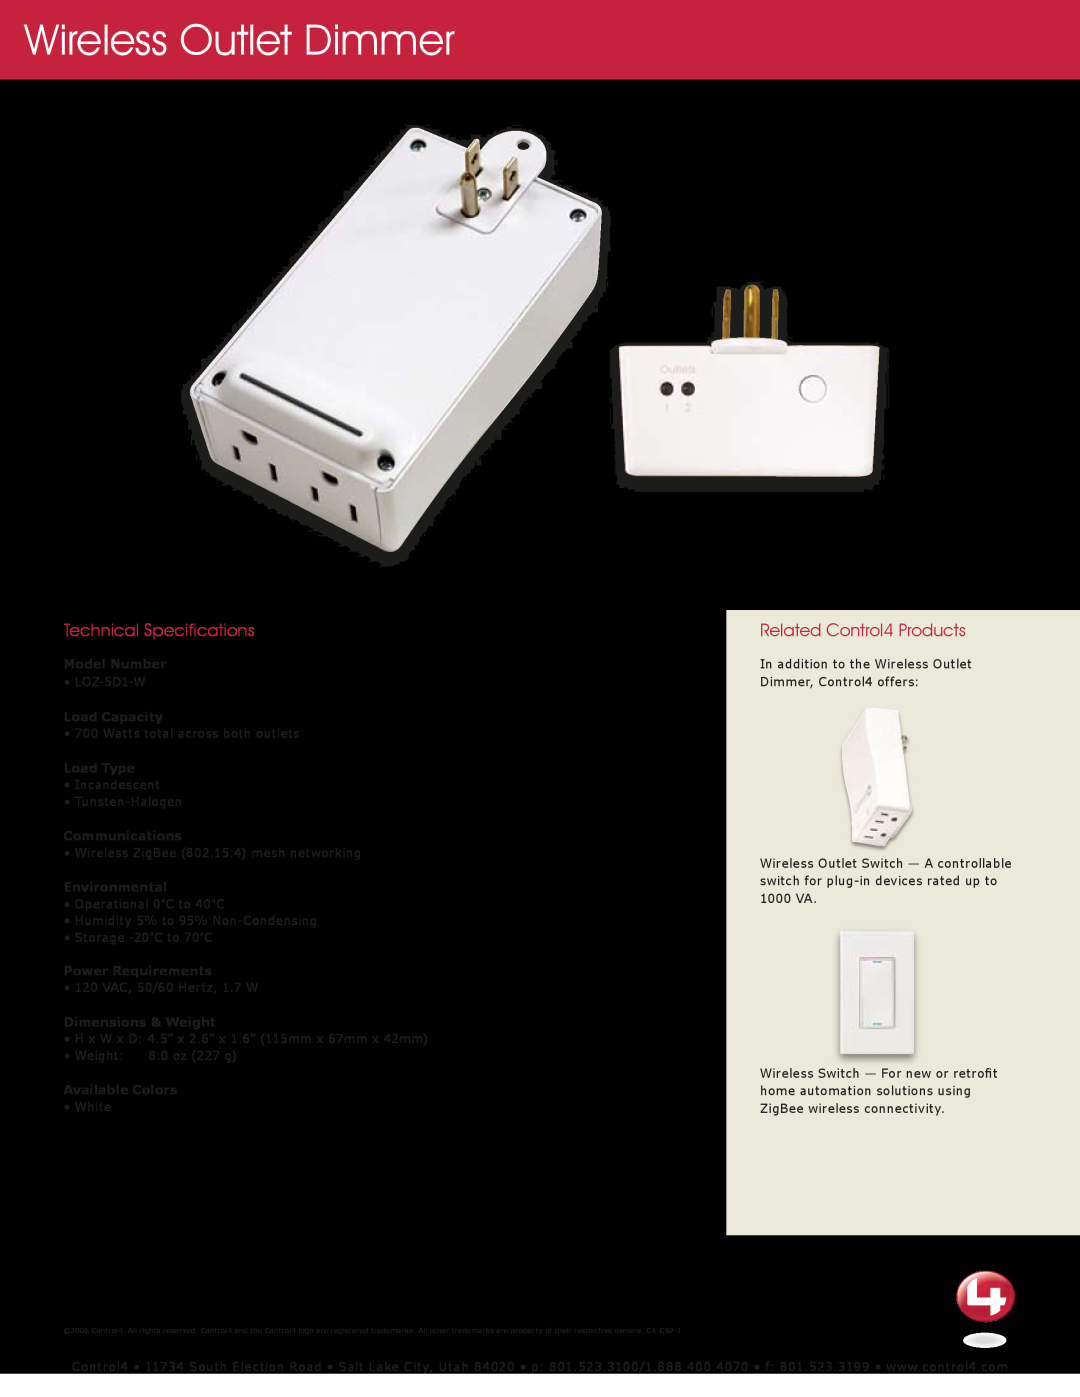 Control4 Wireless Outlet Dimmer manual Technical Specifications, Related Control4 Products, Model Number, Load Capacity 